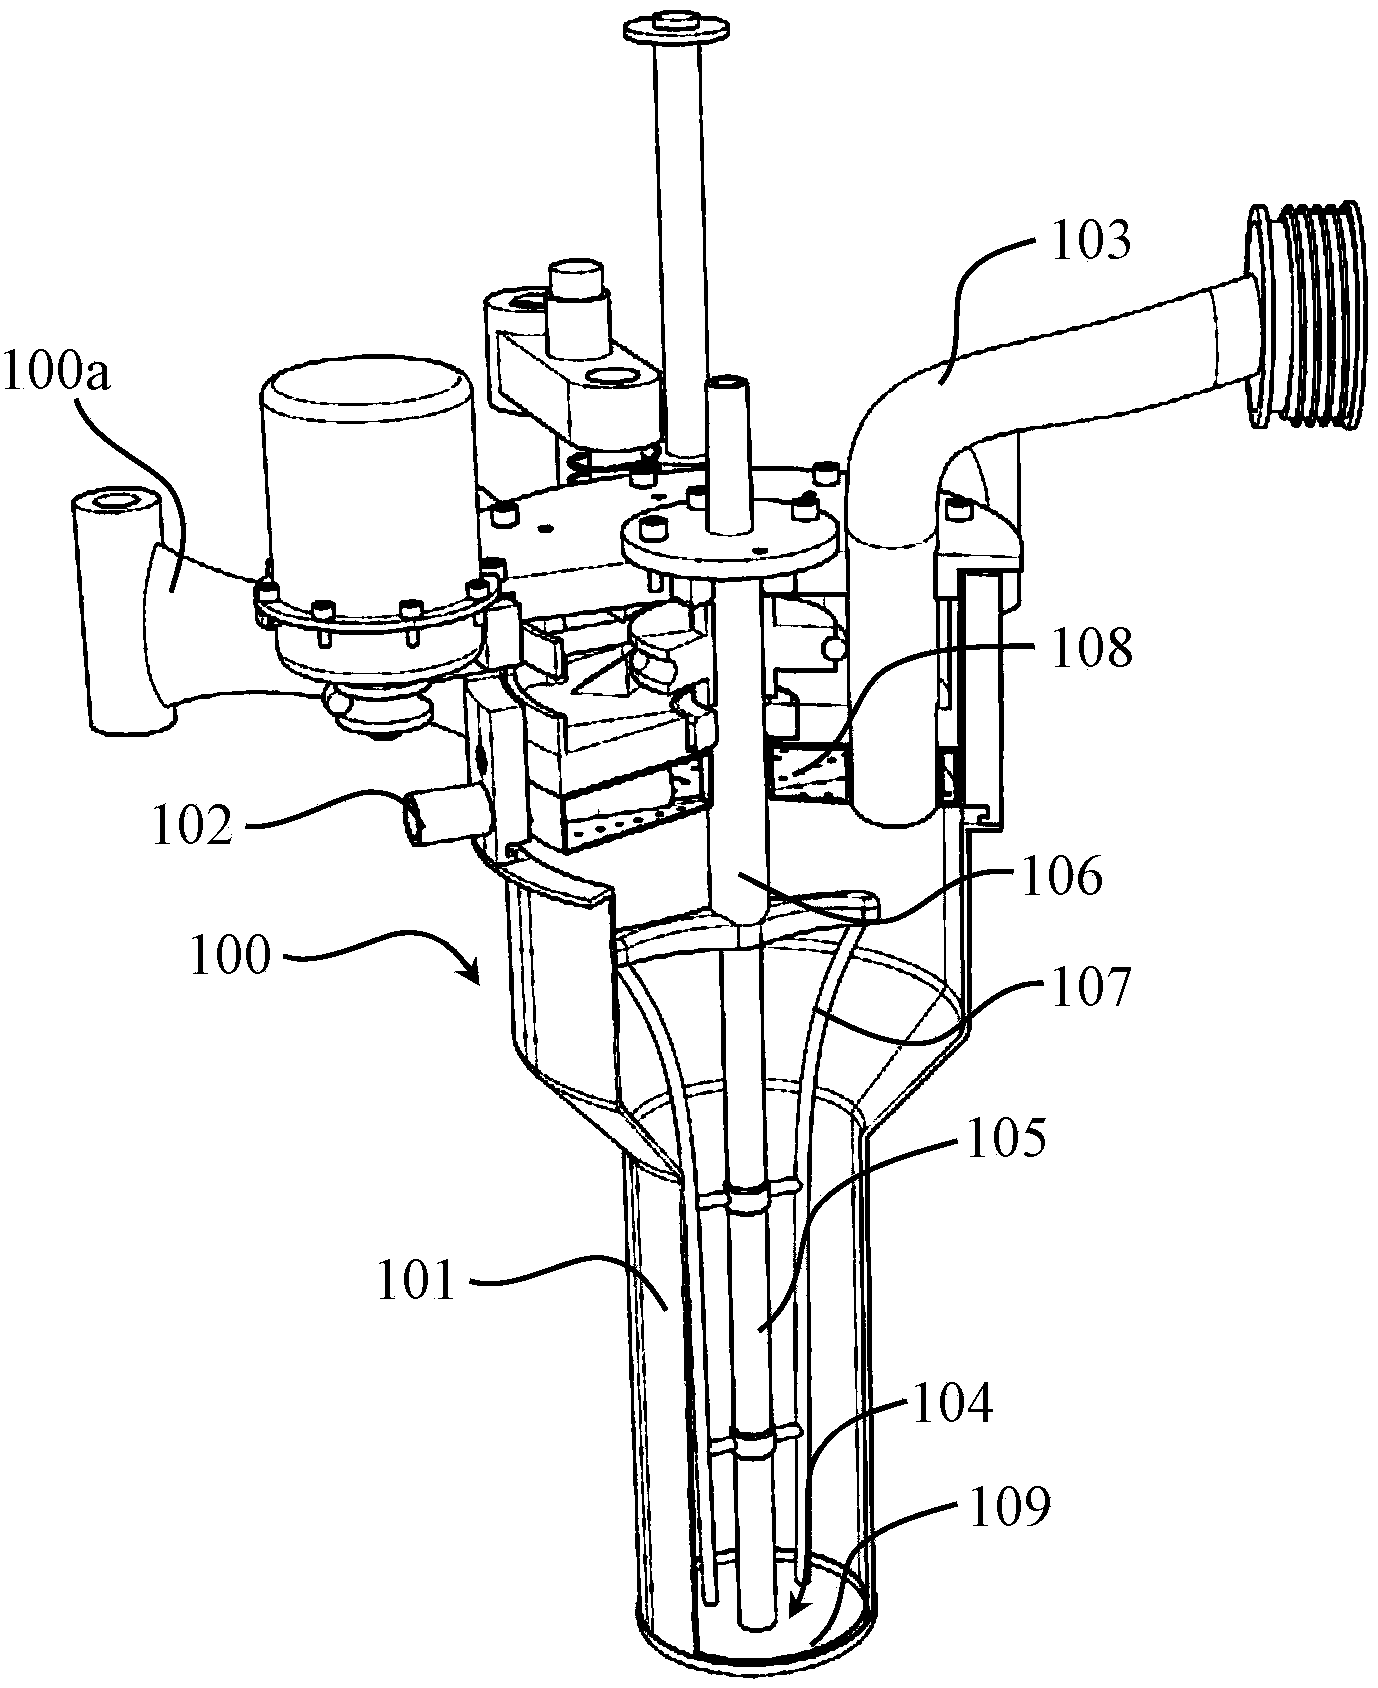 Full-automatic electric cooker